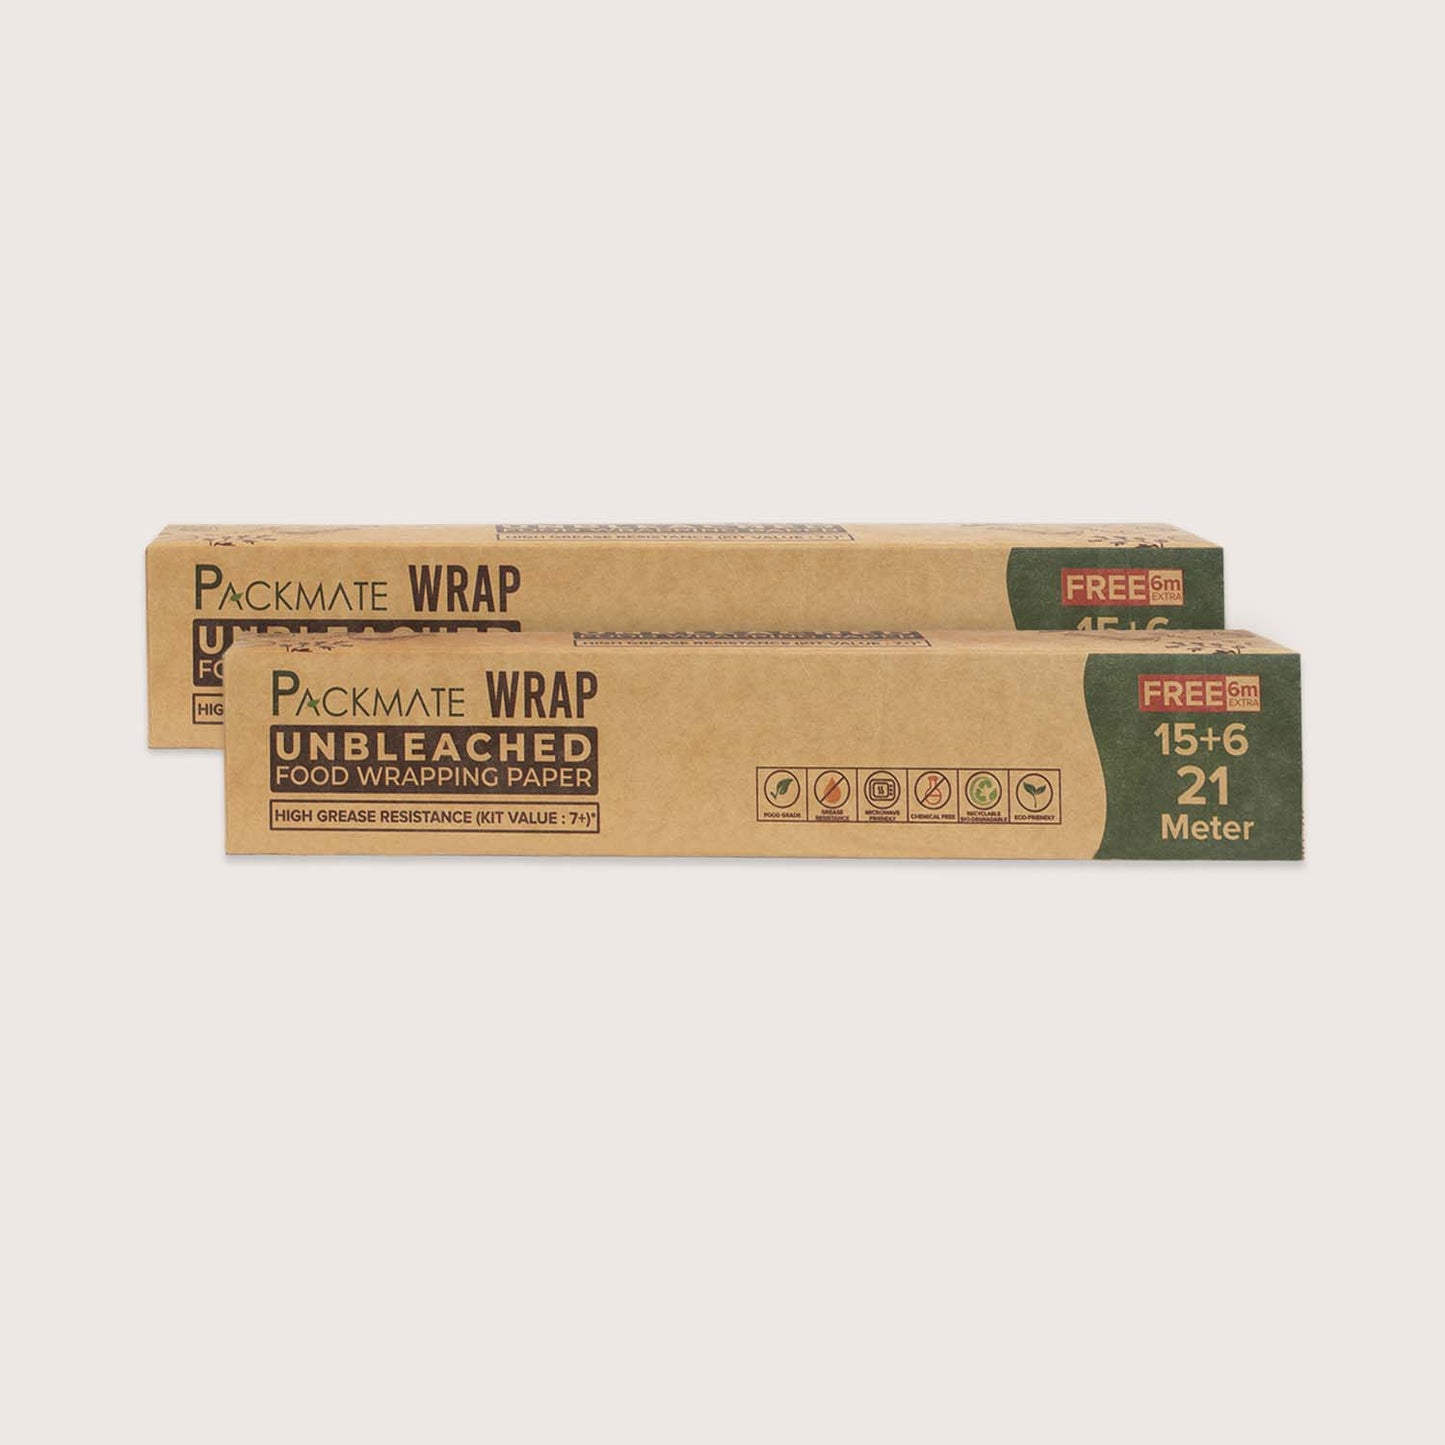 Packmate Wrap - Unbleached Greaseproof Food Wraping Paper (Brown), 21 (15+6) Meter Roll (Pack of 2)